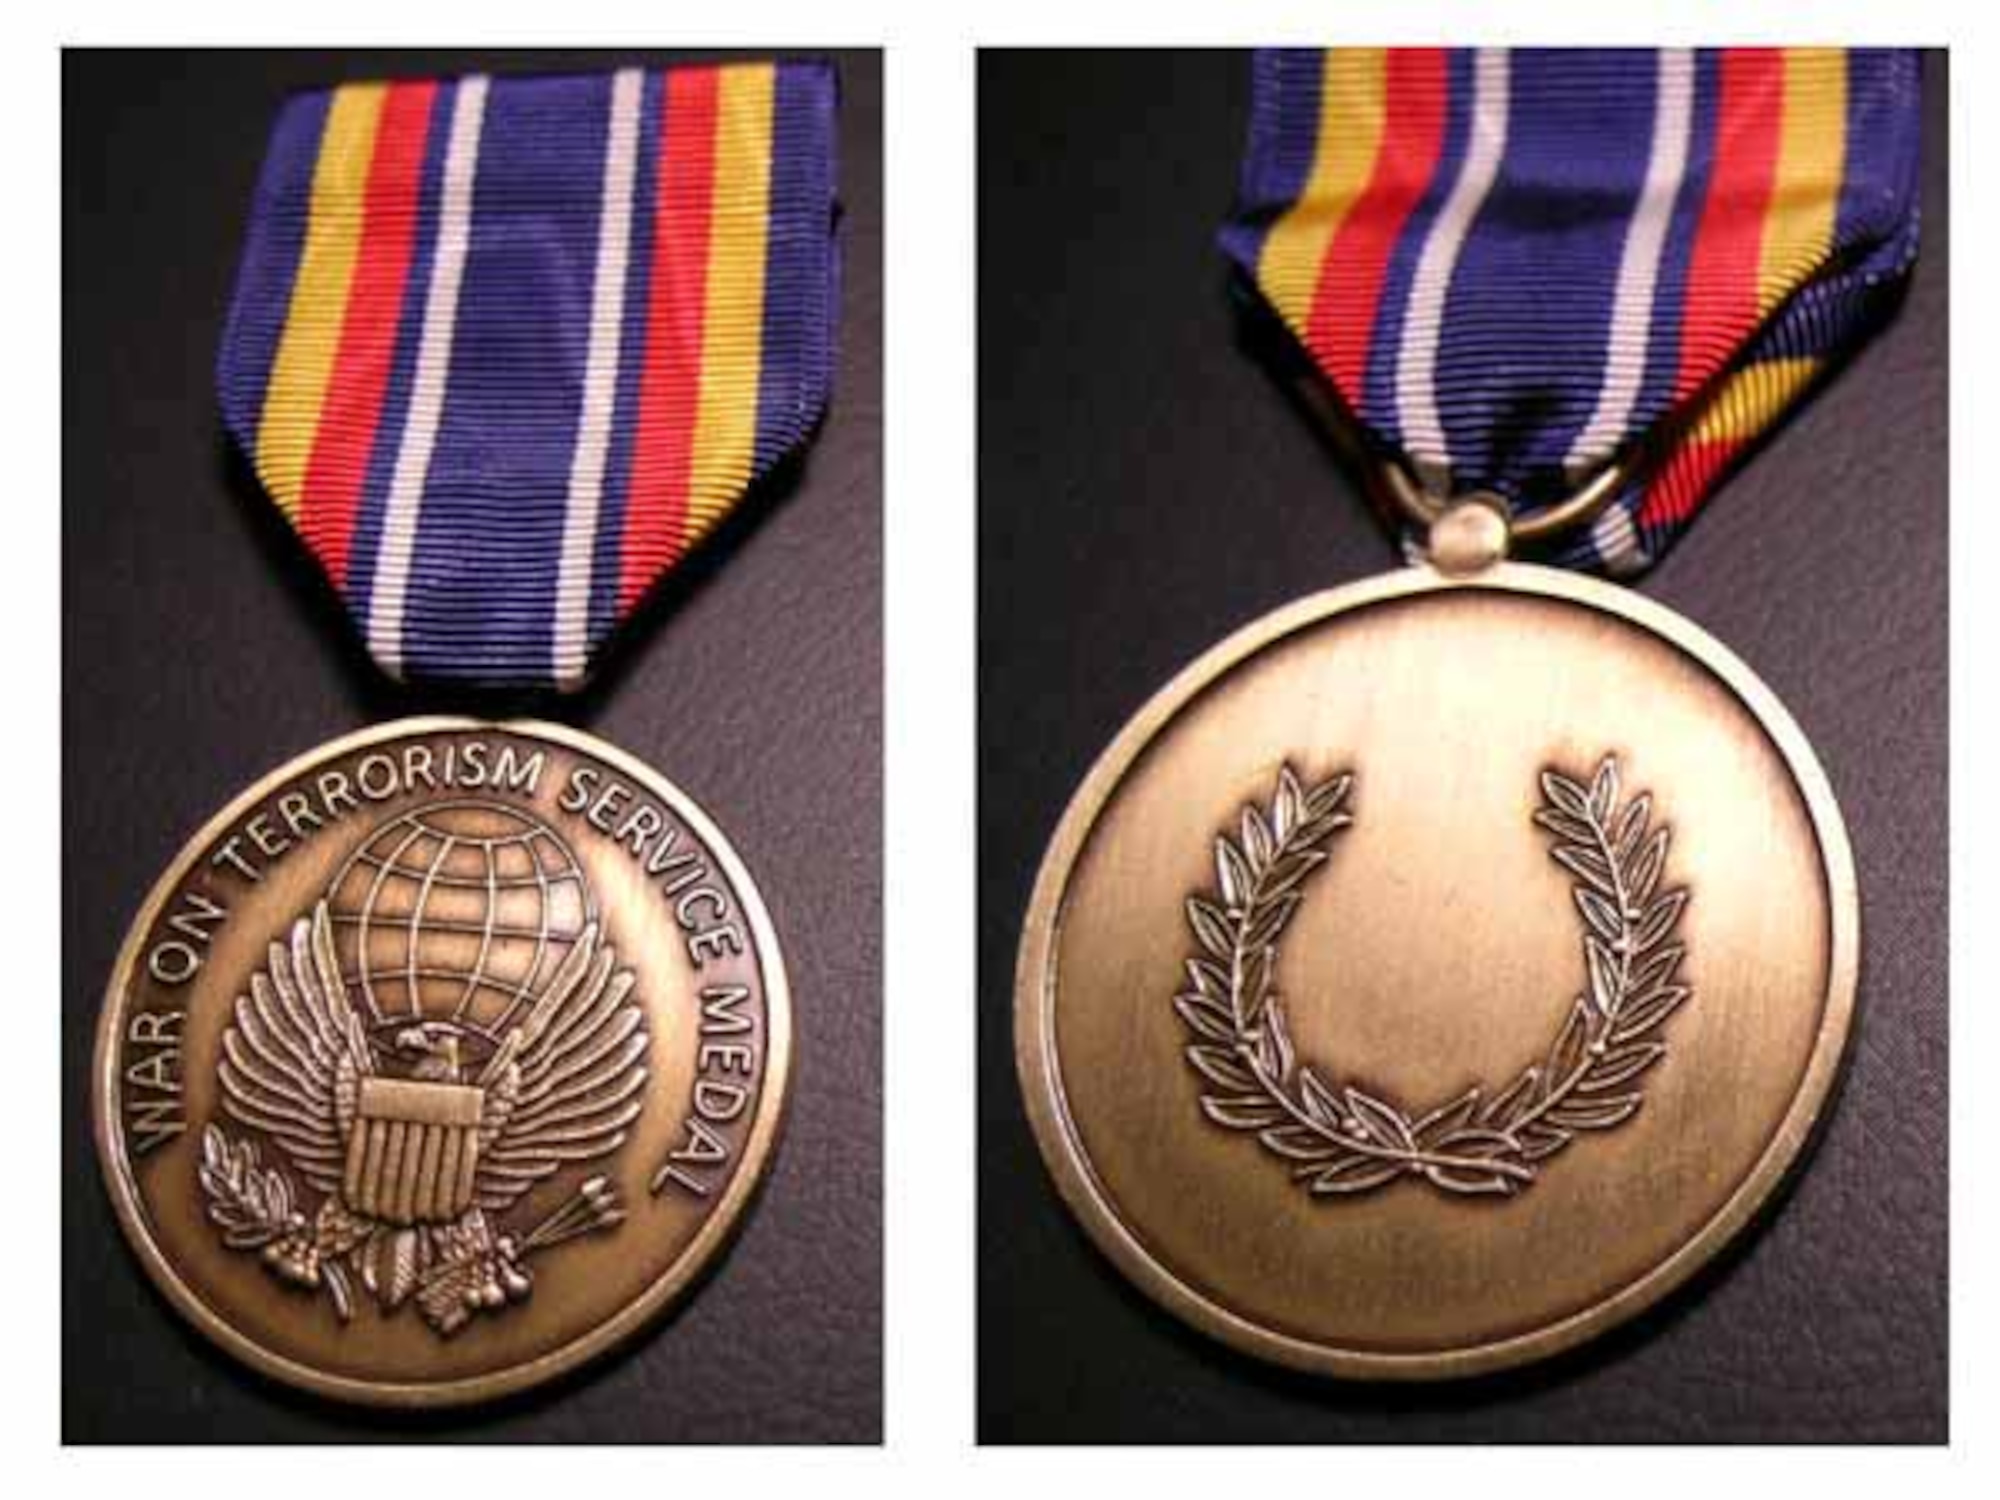 WASHINGTON -- The Global War on Terrorism Service Medal has an eagle and wings display, with a terrestrial globe and the inscription "War on Terrorism Service Medal."  The reverse side features a laurel wreath.  The medal's final approval was announced Feb. 26.  (Courtesy photo)